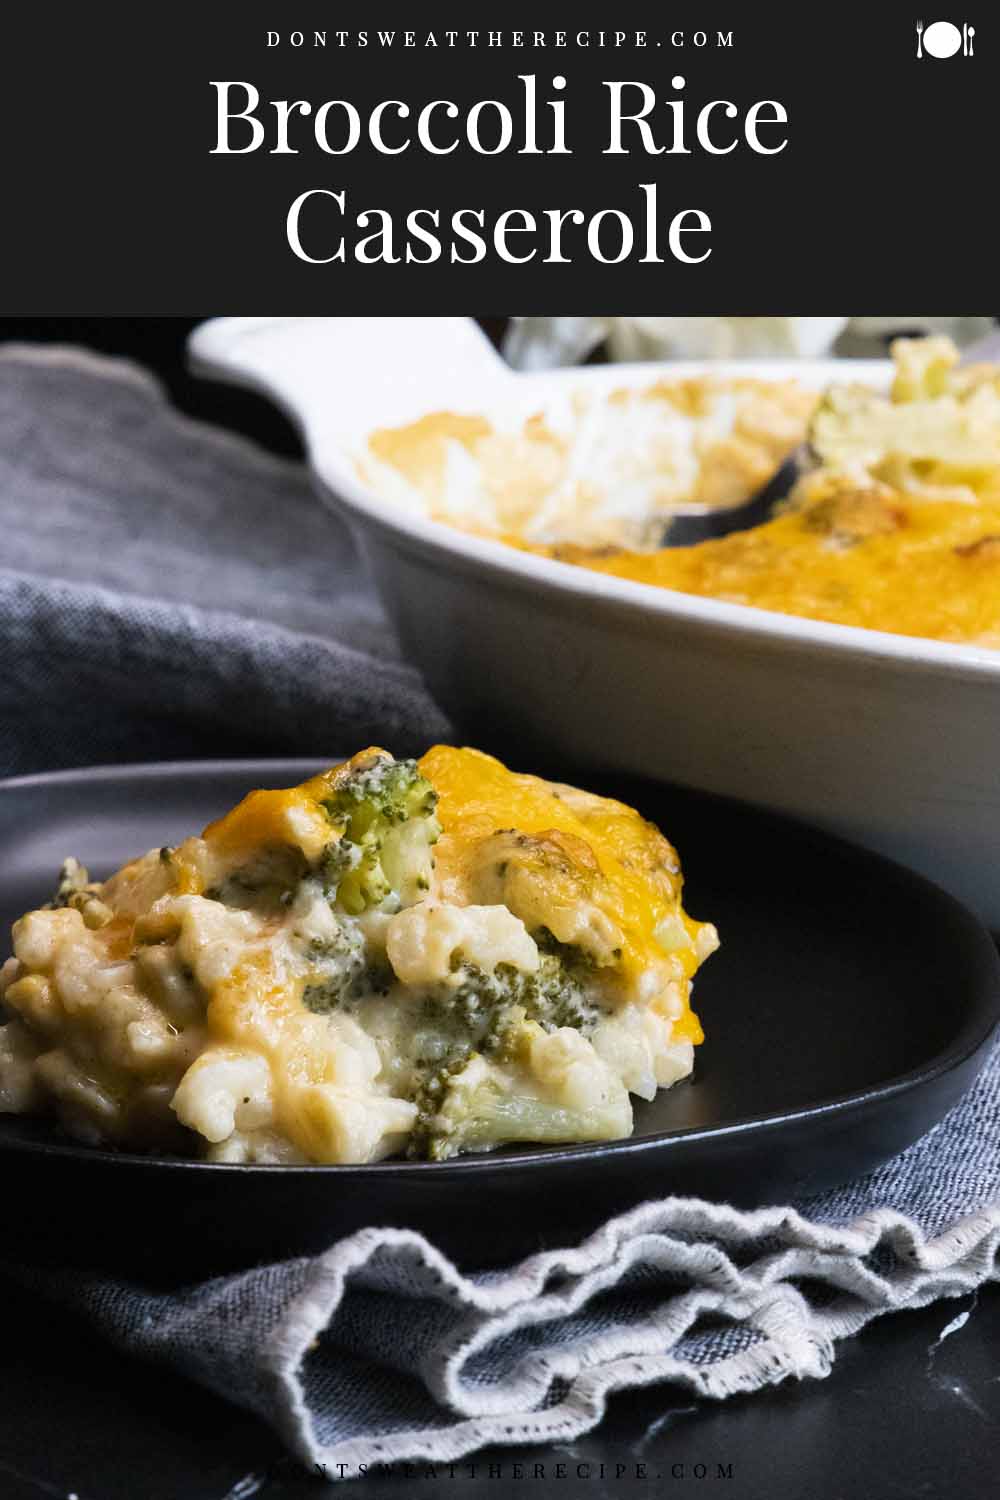 Broccoli Cheese Casserole with Rice - Don't Sweat The Recipe